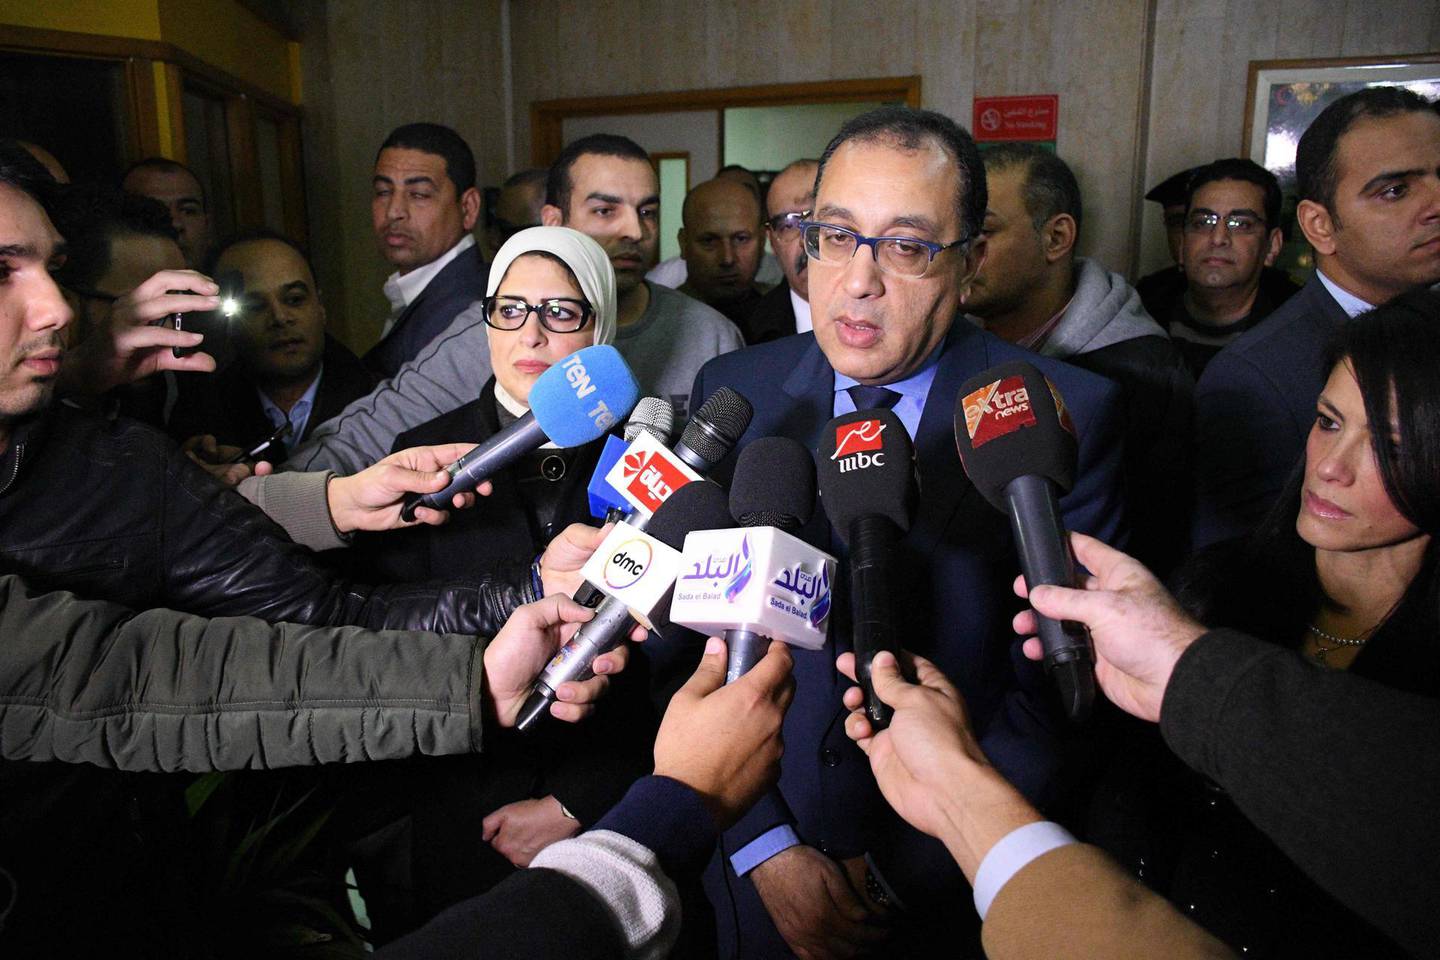 Egypt's Prime Minister Mostafa Madbouli speaks to journalists as he arrives at the hospital where Vietnamese victims of an attack on a tourist bus where taken, in Al-Haram district in the Egyptian capital Cairo's western twin city of Giza on December 28, 2018. Three Vietnamese holidaymakers and an Egyptian tour guide were killed on December 28 when a roadside bomb blast hit their bus as it travelled close to the Giza pyramids outside Cairo, officials said. / AFP / Tarek IBRAHIM
